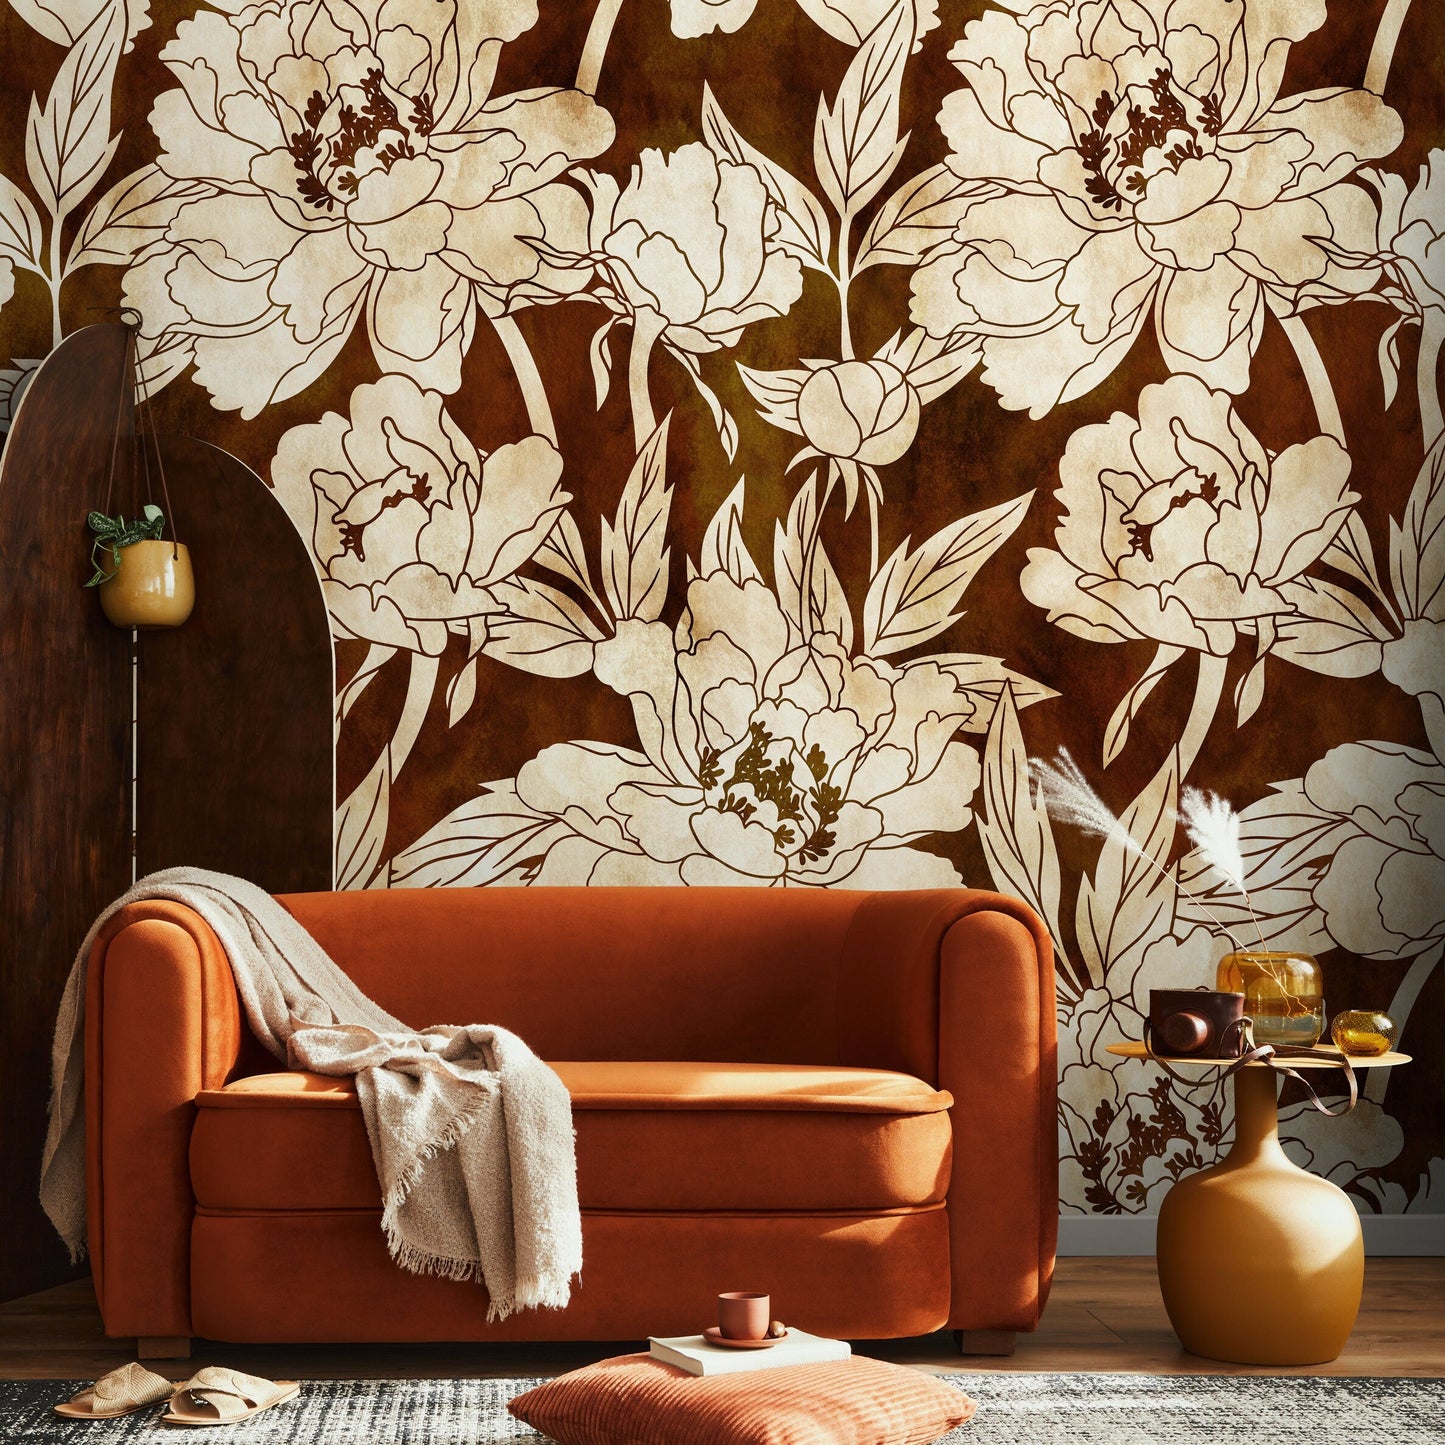 Gold Large Floral Wallpaper / Peel and Stick Wallpaper Removable Wallpaper Home Decor Wall Art Wall Decor Room Decor - C916